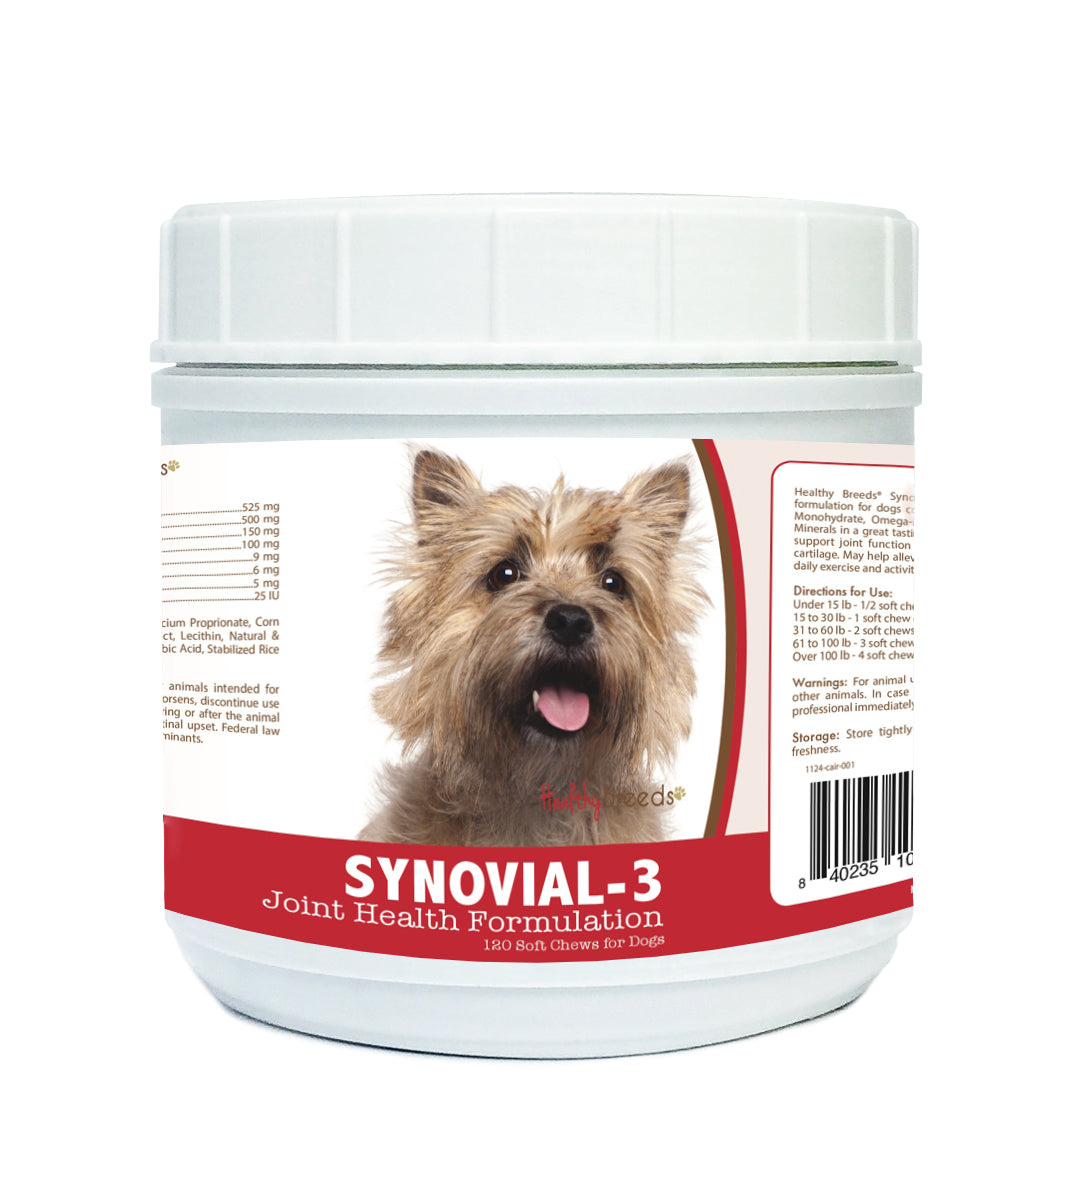 Cairn Terrier Synovial-3 Joint Health Formulation Soft Chews 120 Count